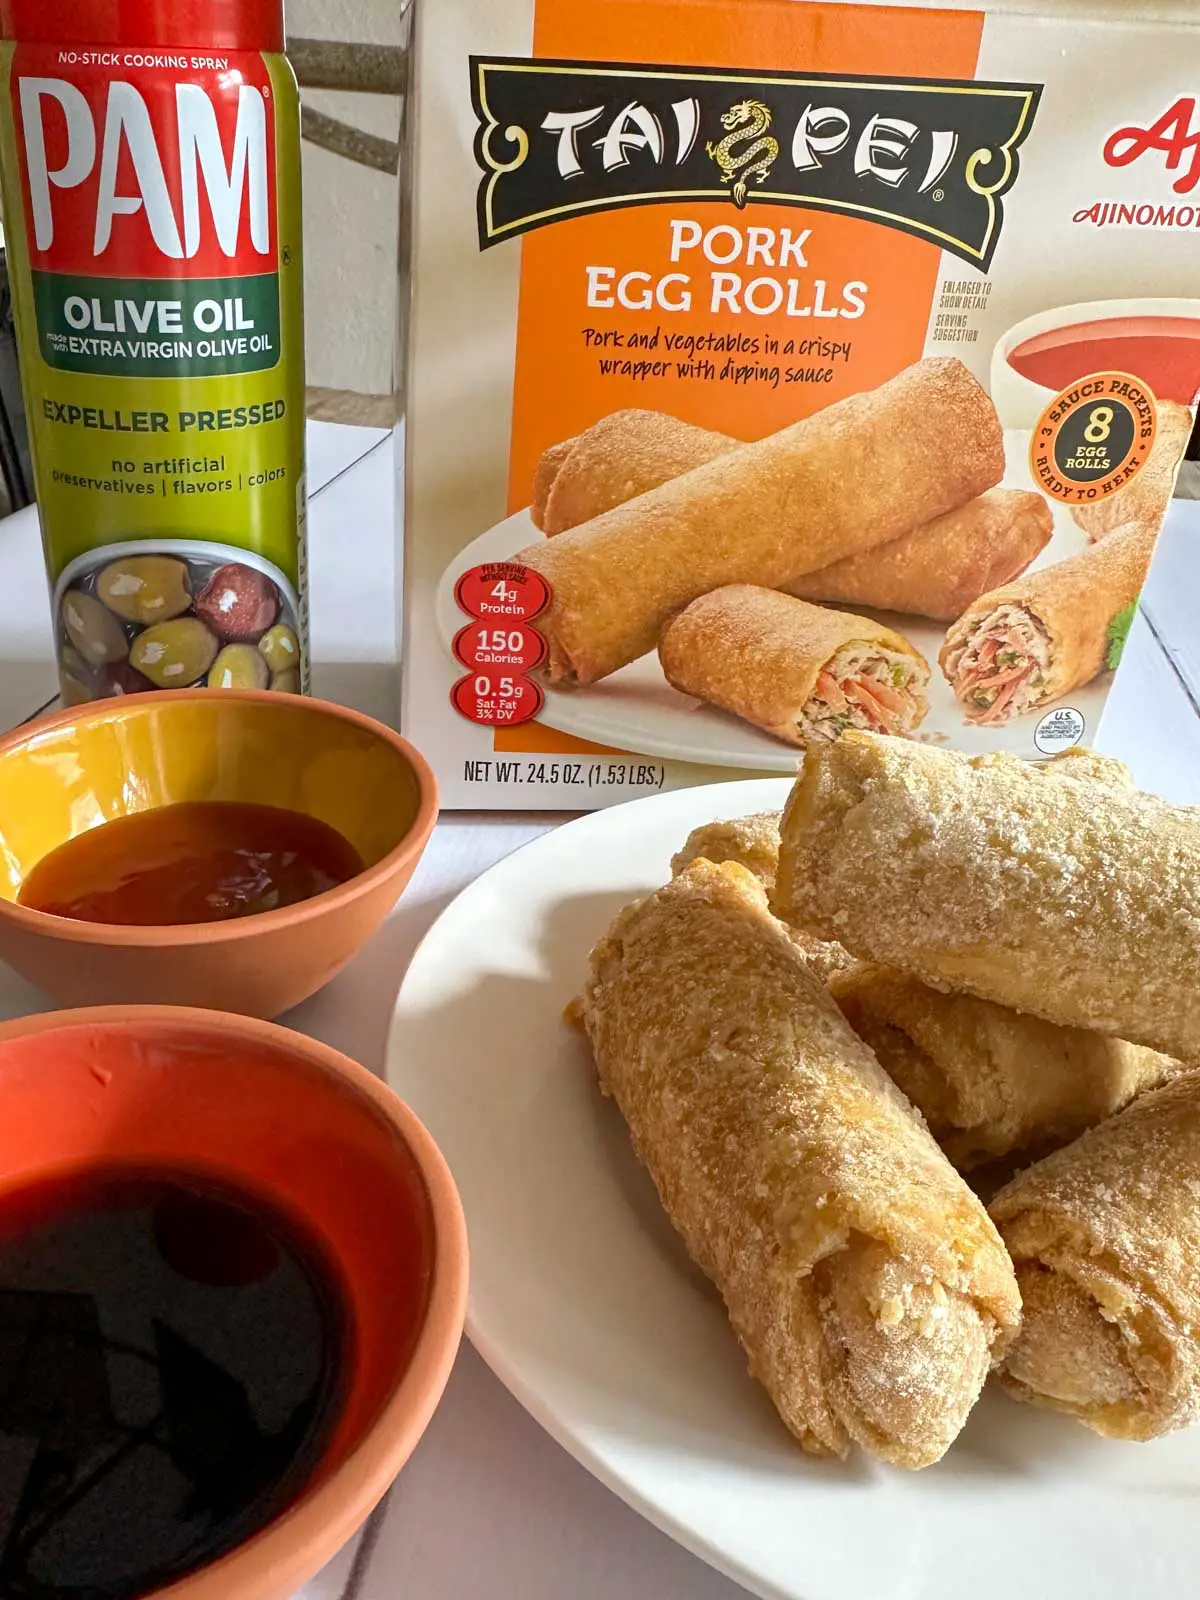 A package of Tai Pei Pork Egg Rolls, bottle of Pam Olive Oil Cooking Spray, frozen egg rolls on a white plate and 2 small bowls with dipping sauces.